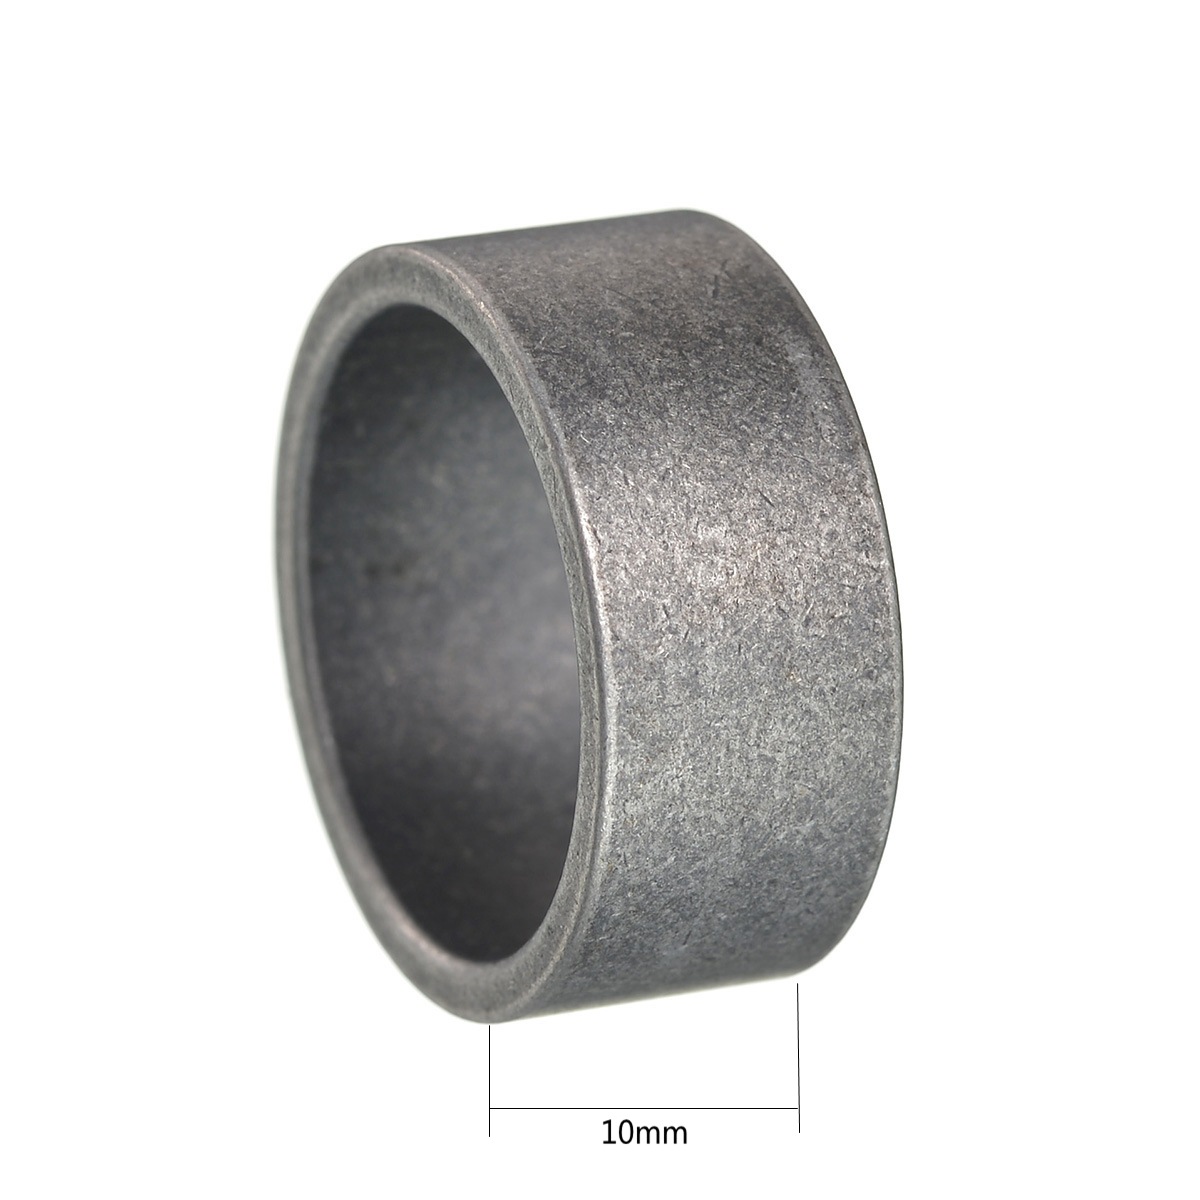 10mm antique silver finish